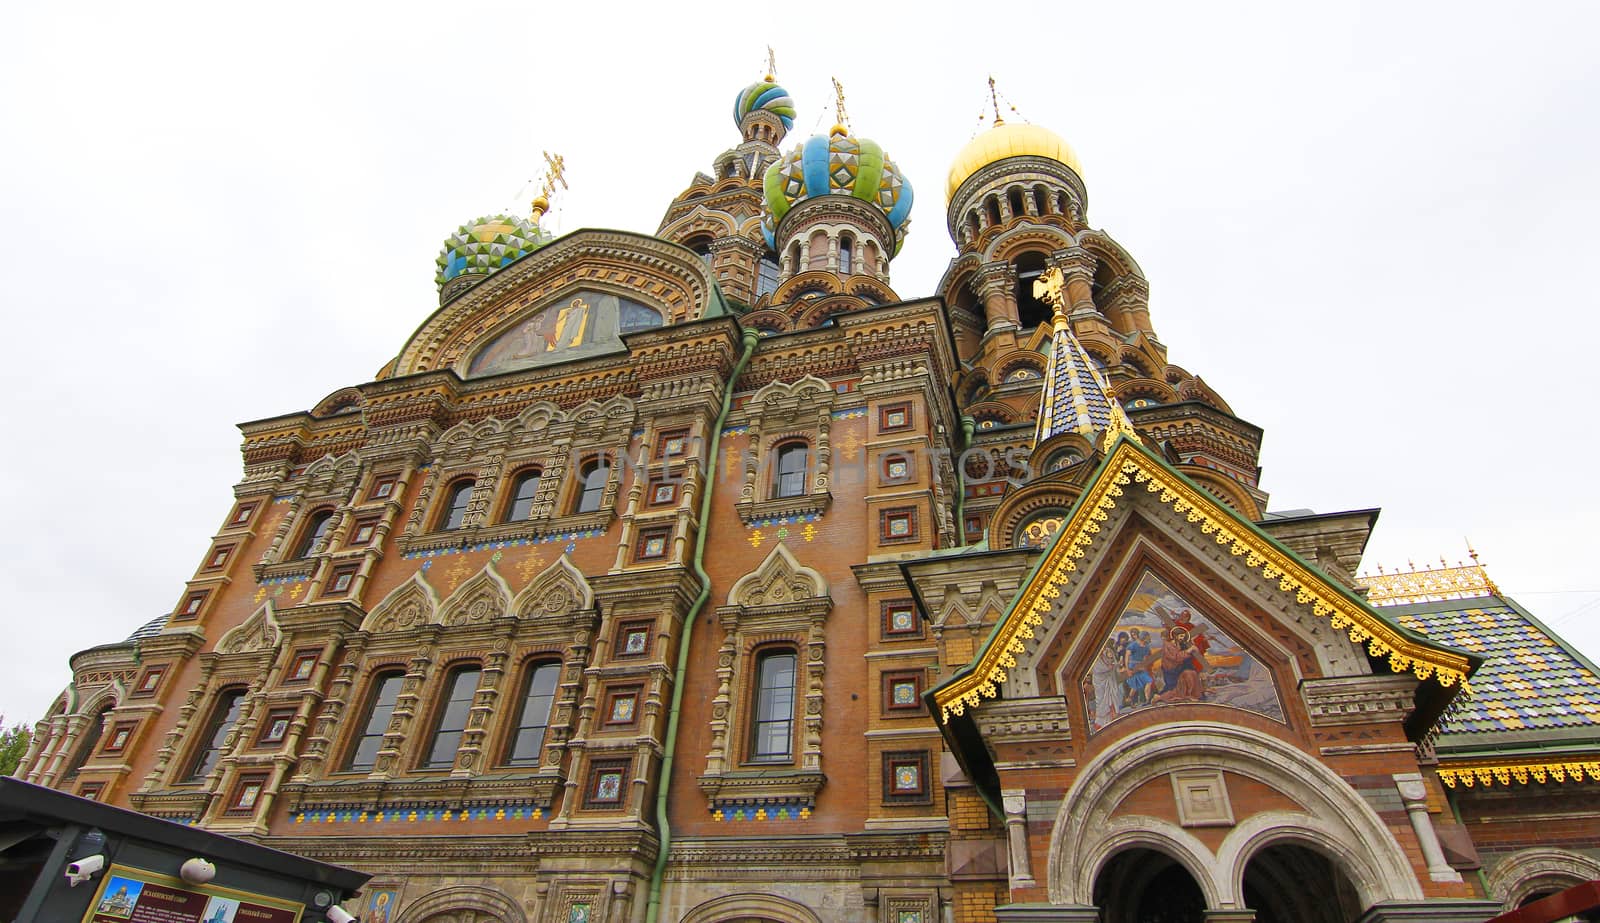 The Church of the Savior on Spilled Blood, St. Petersburg, Russi by pumppump